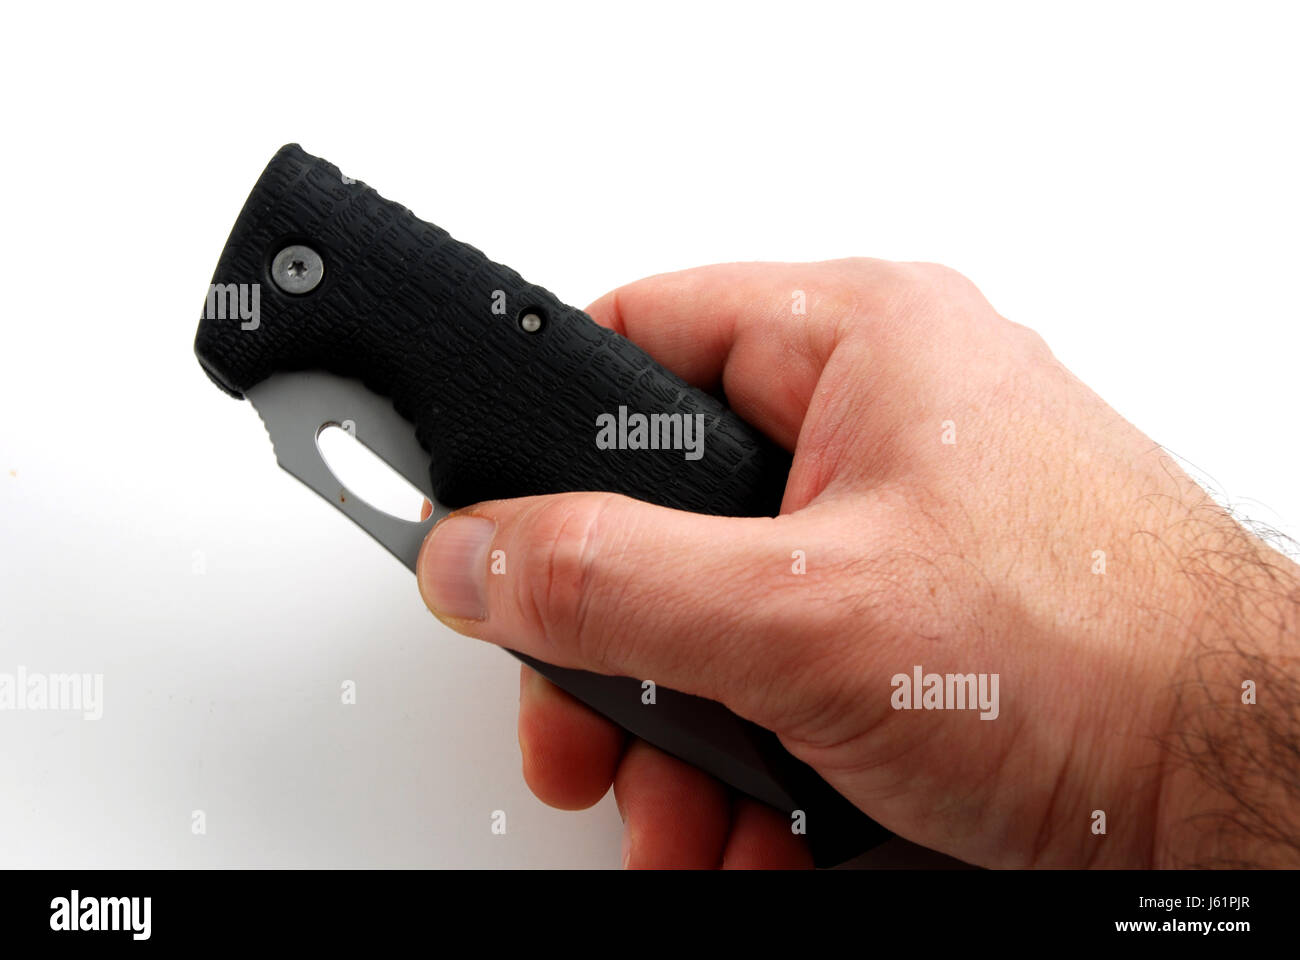 tool arm weapon knive knife danger tool fight fighting panic hunt fear steel Stock Photo